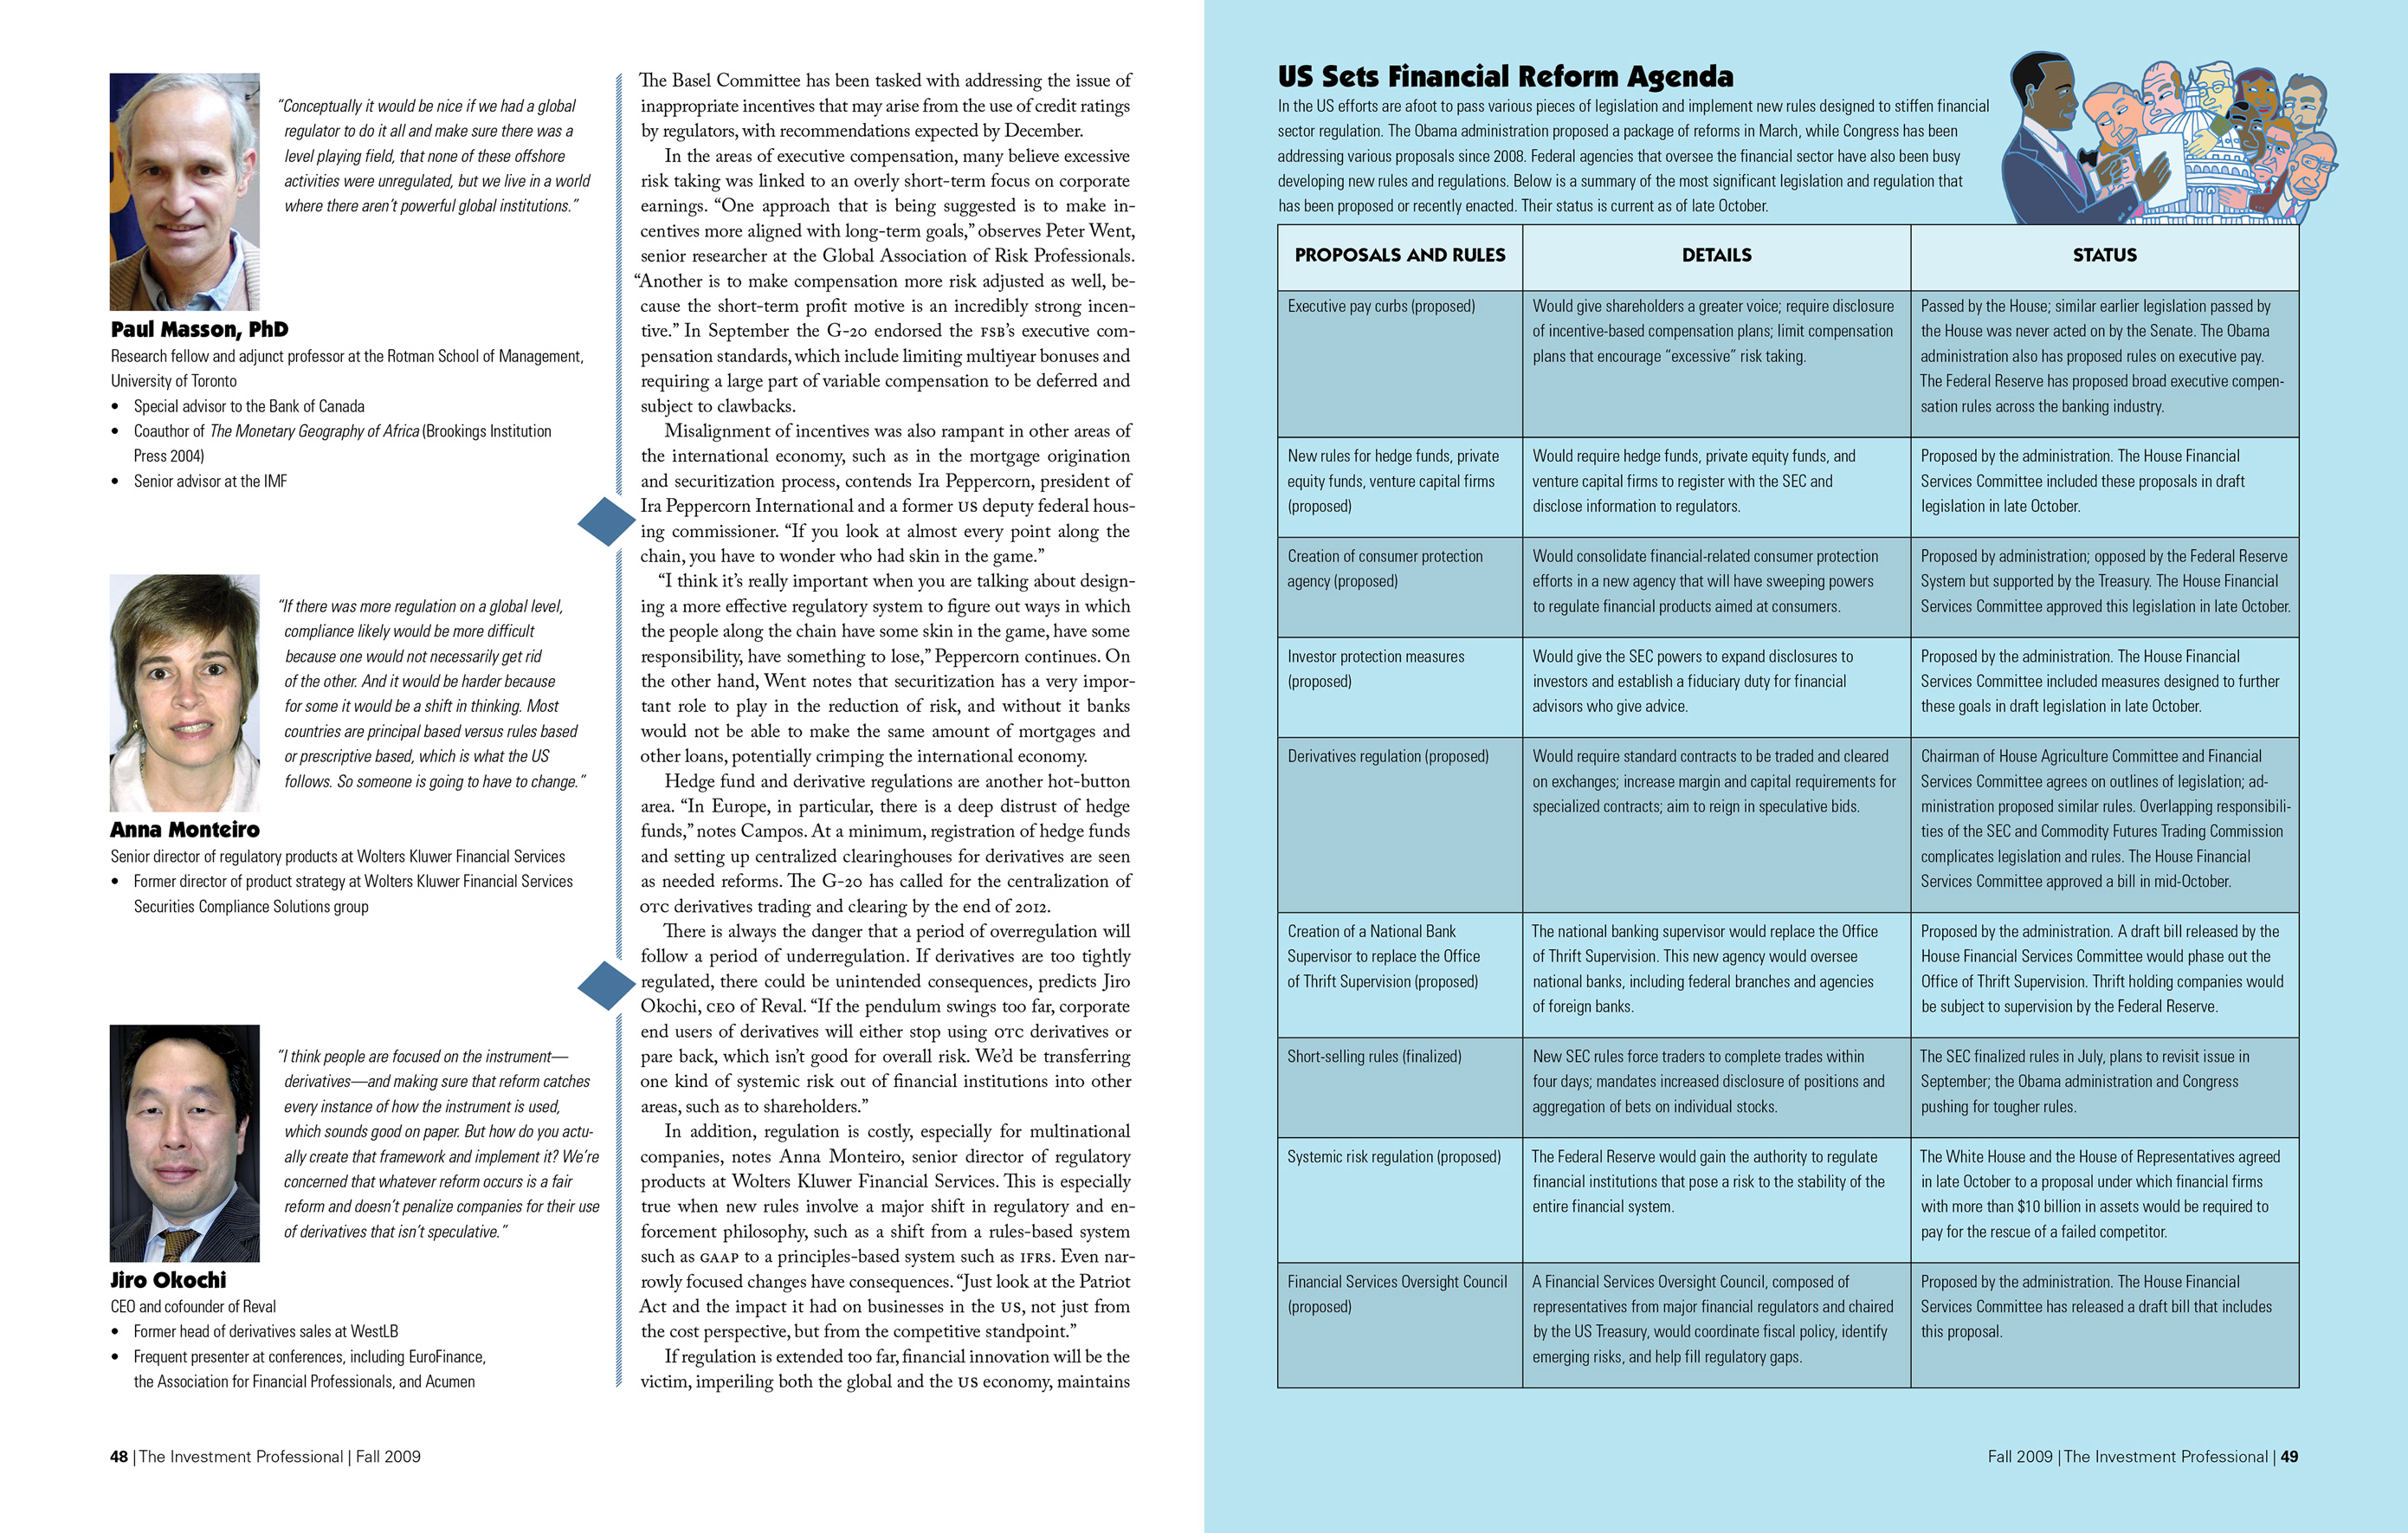 Third spread of the article titled 'Mending the Seams,' including headshots of and quotes from experts: Paul Masson of Rotman School of Management, University of Toronto; Anna Monteiro of Wolters Kluwer Financial Service; and Jiro Okochi of Reval. A table outlines rules and regulations proposed by the Obama administration for financial reform. Above the table is an illustration of Obama.